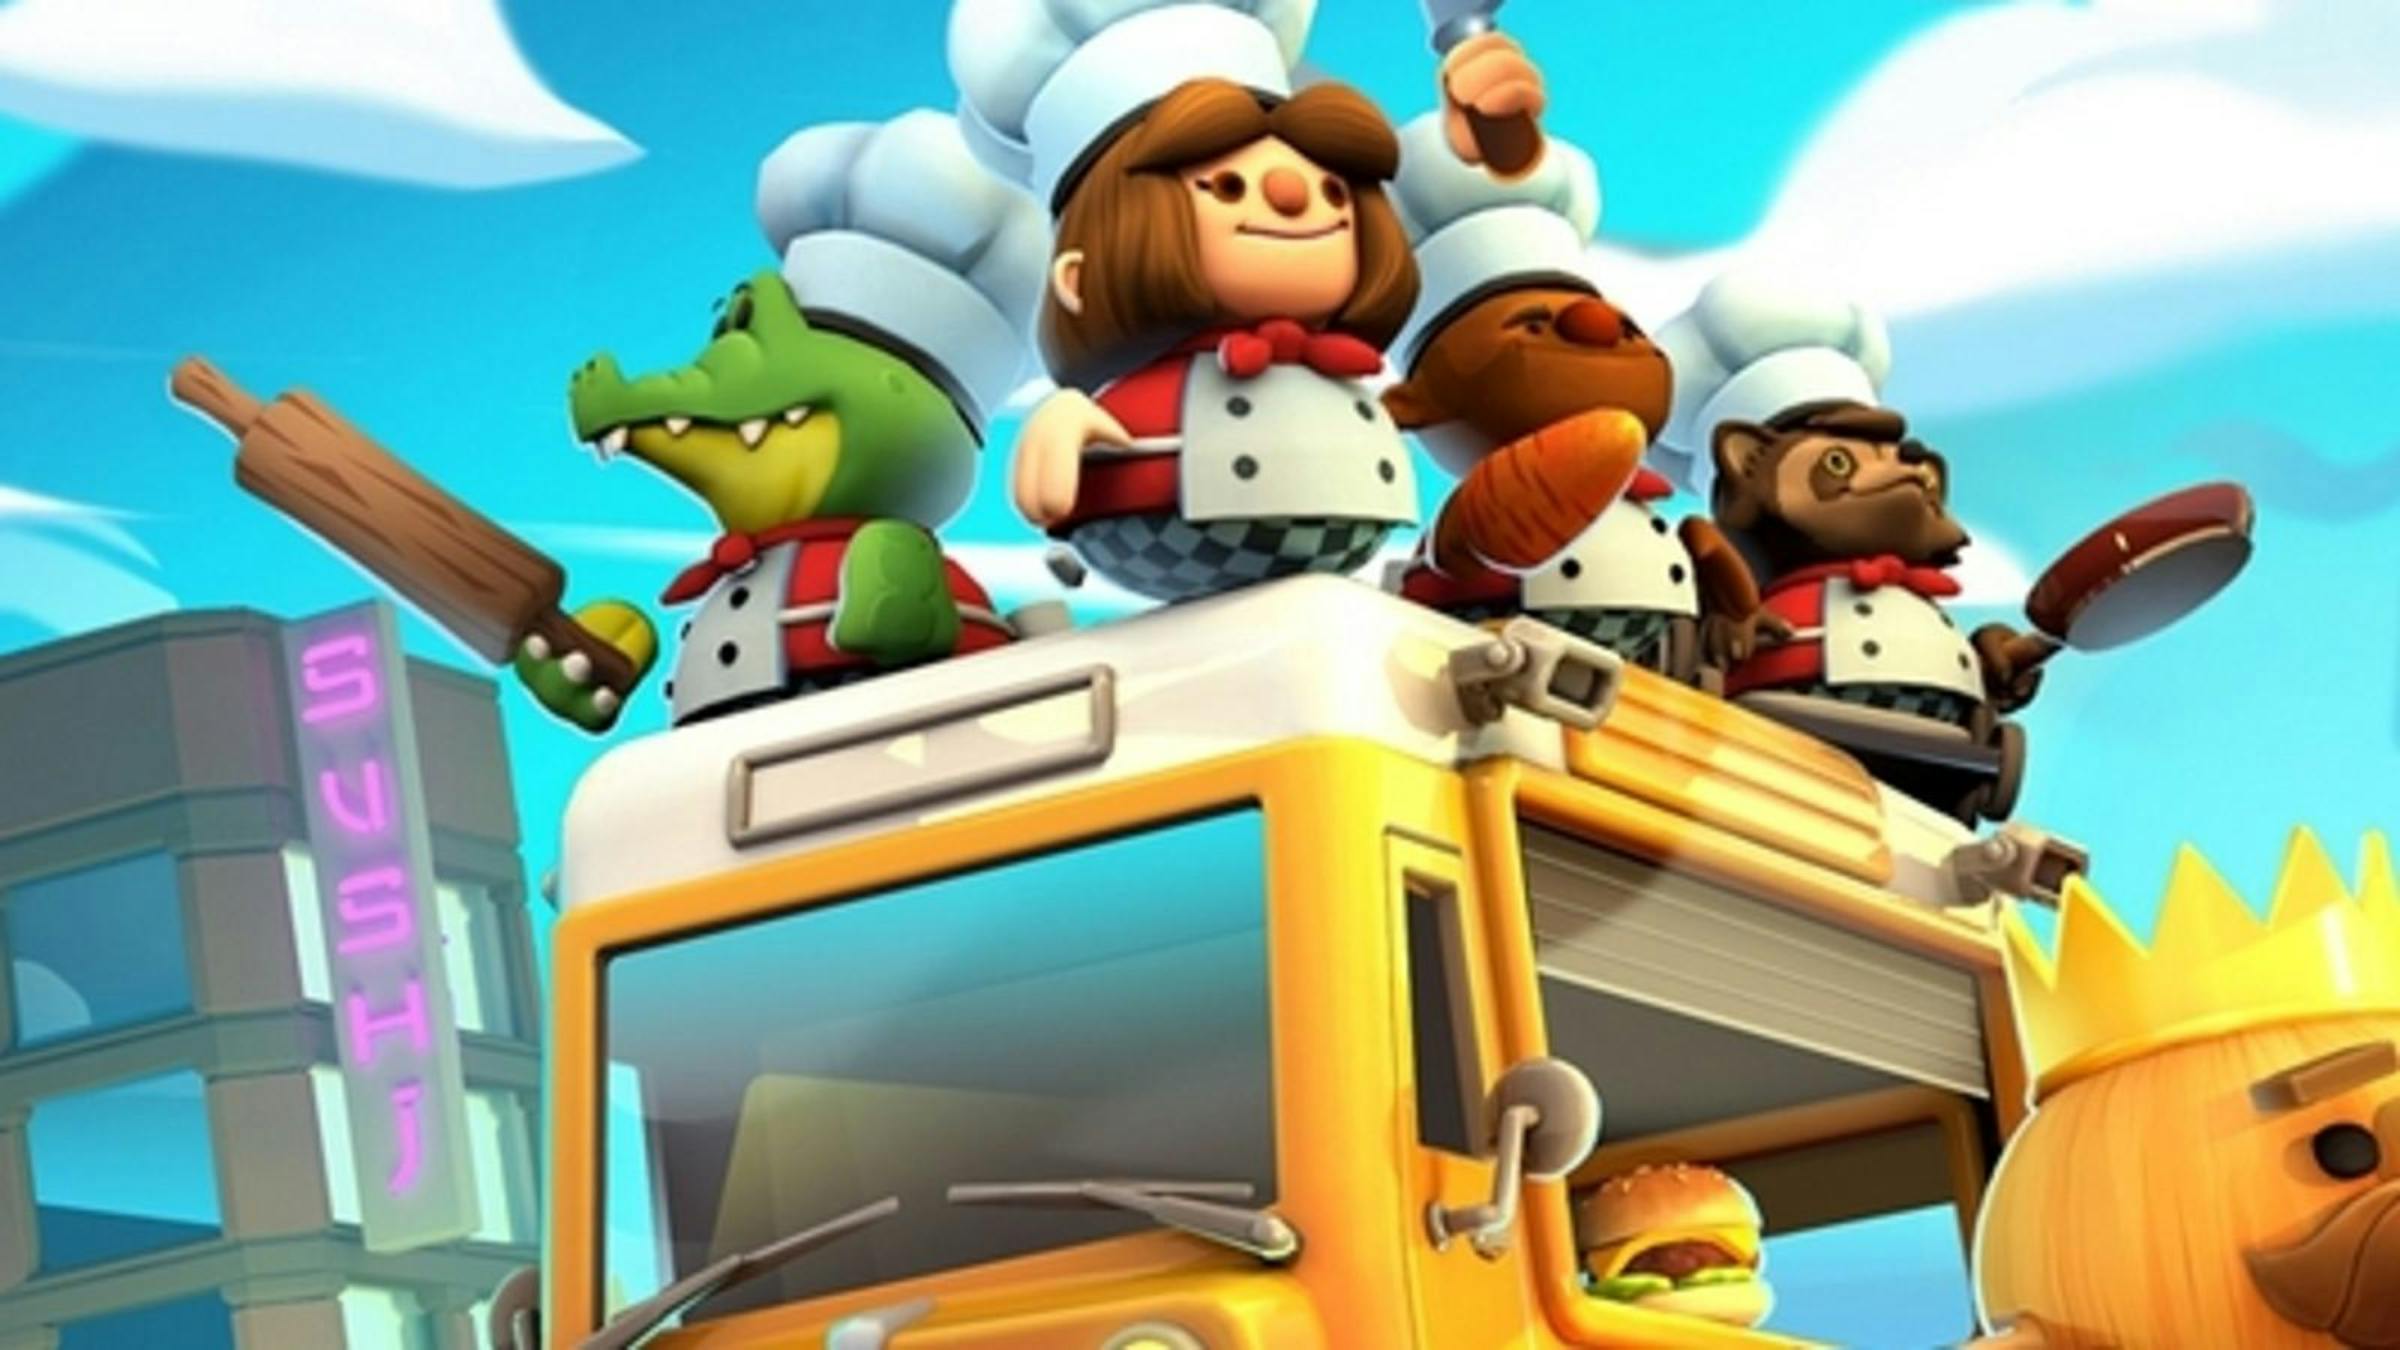 "Overcooked!," developed by Ghost Town Games and published by Team17 is a great example of a game franchise with a strong understanding of its audience that has maintained consistent marketing throughout its development.